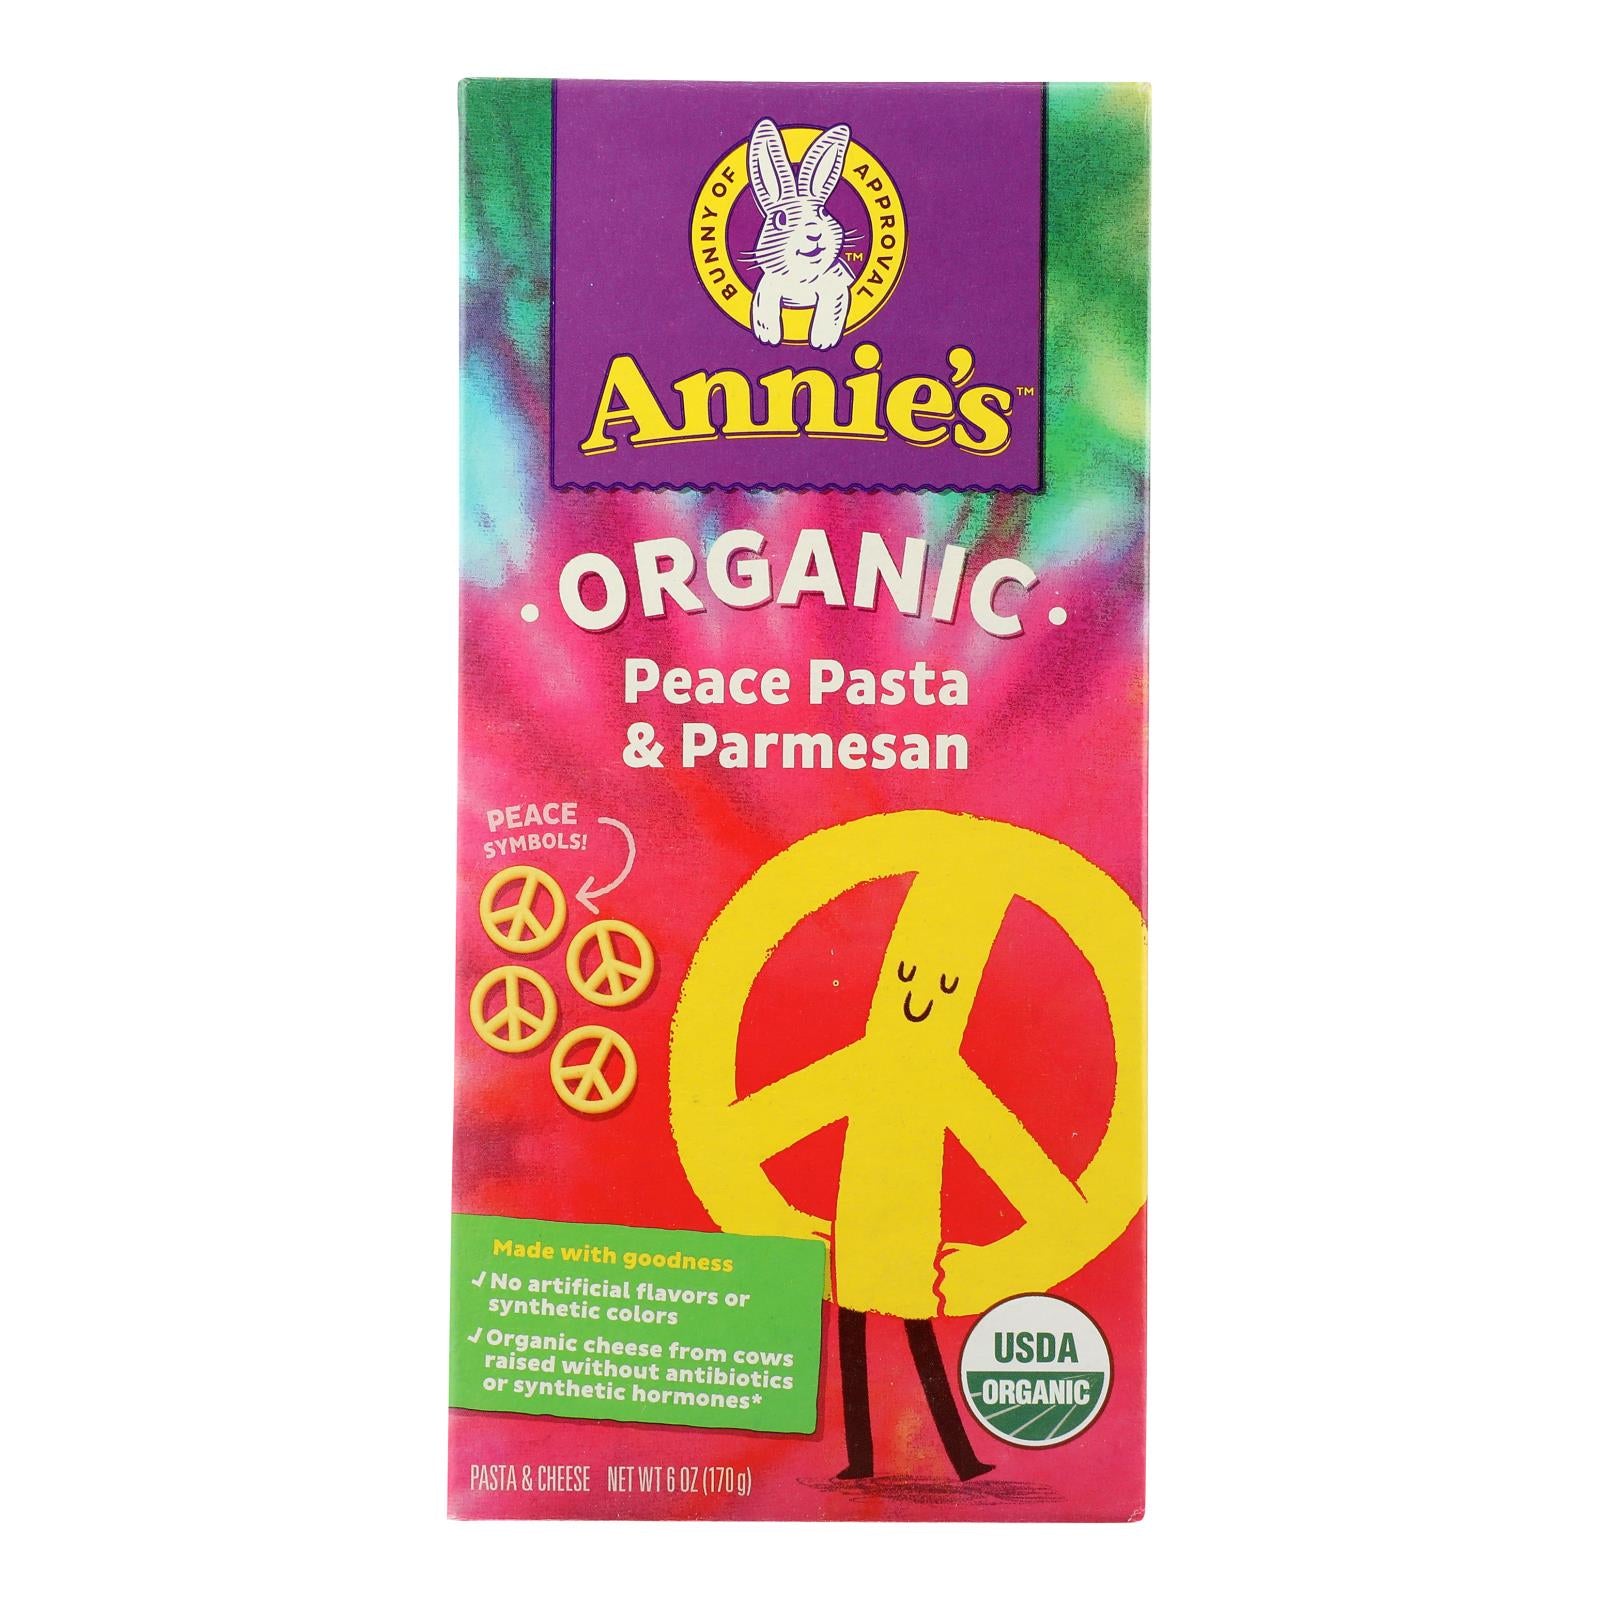 Annies Homegrown Macaroni And Cheese - Organic - Peace Pasta And Parmesan - 6 Oz - Case Of 12